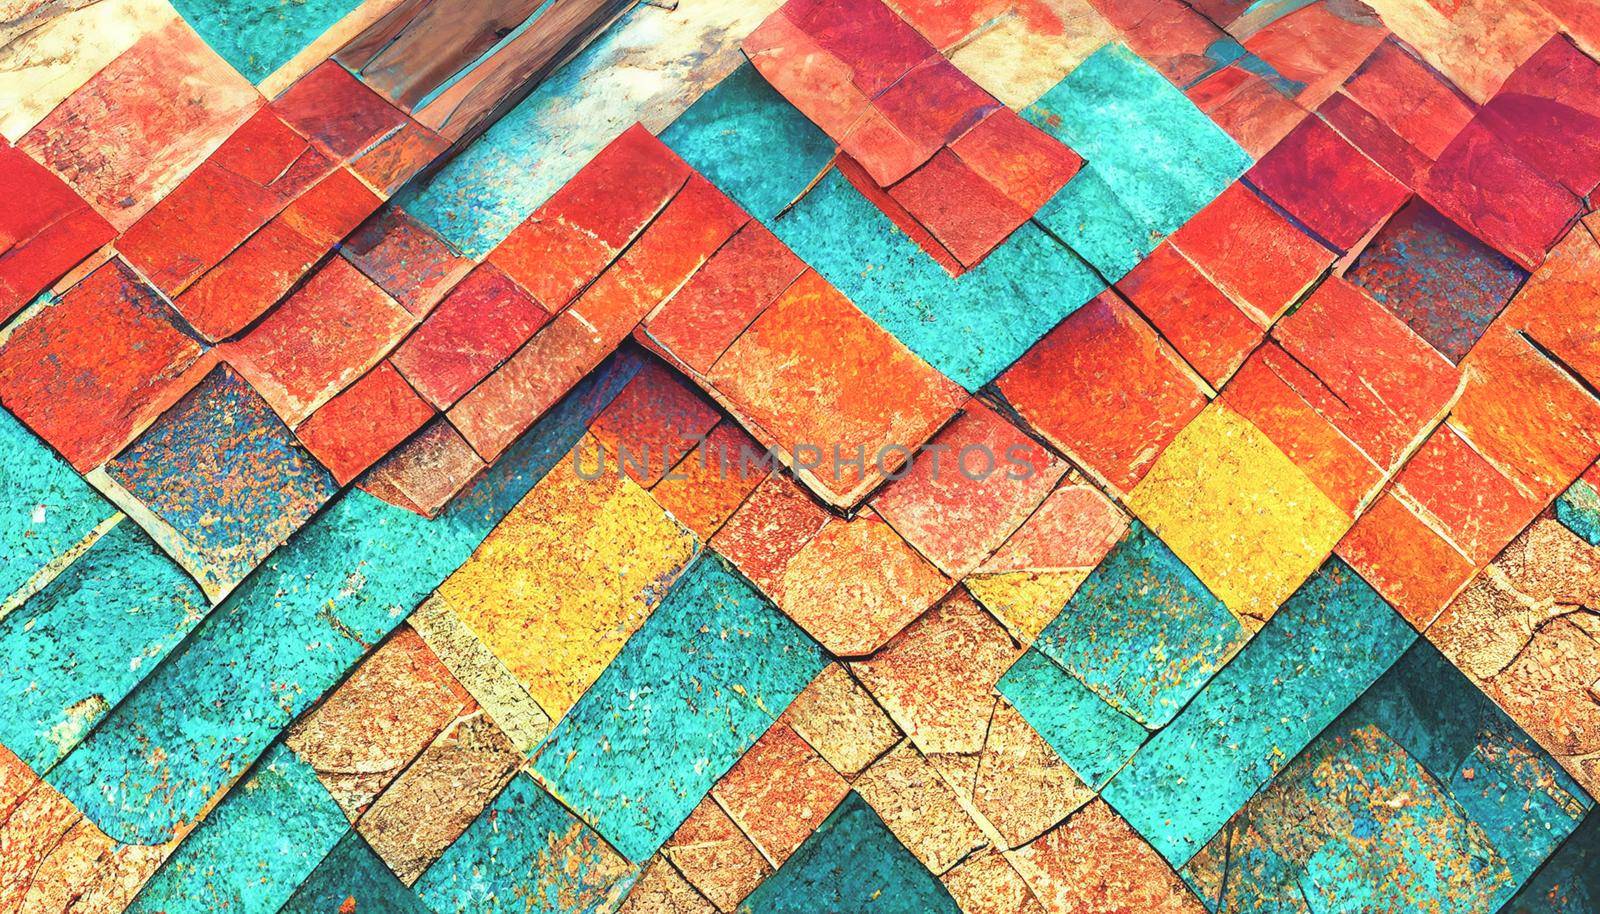 3D render abstract colorful texture background series design for creative wallpaper or design art work. Creativity and imagination.